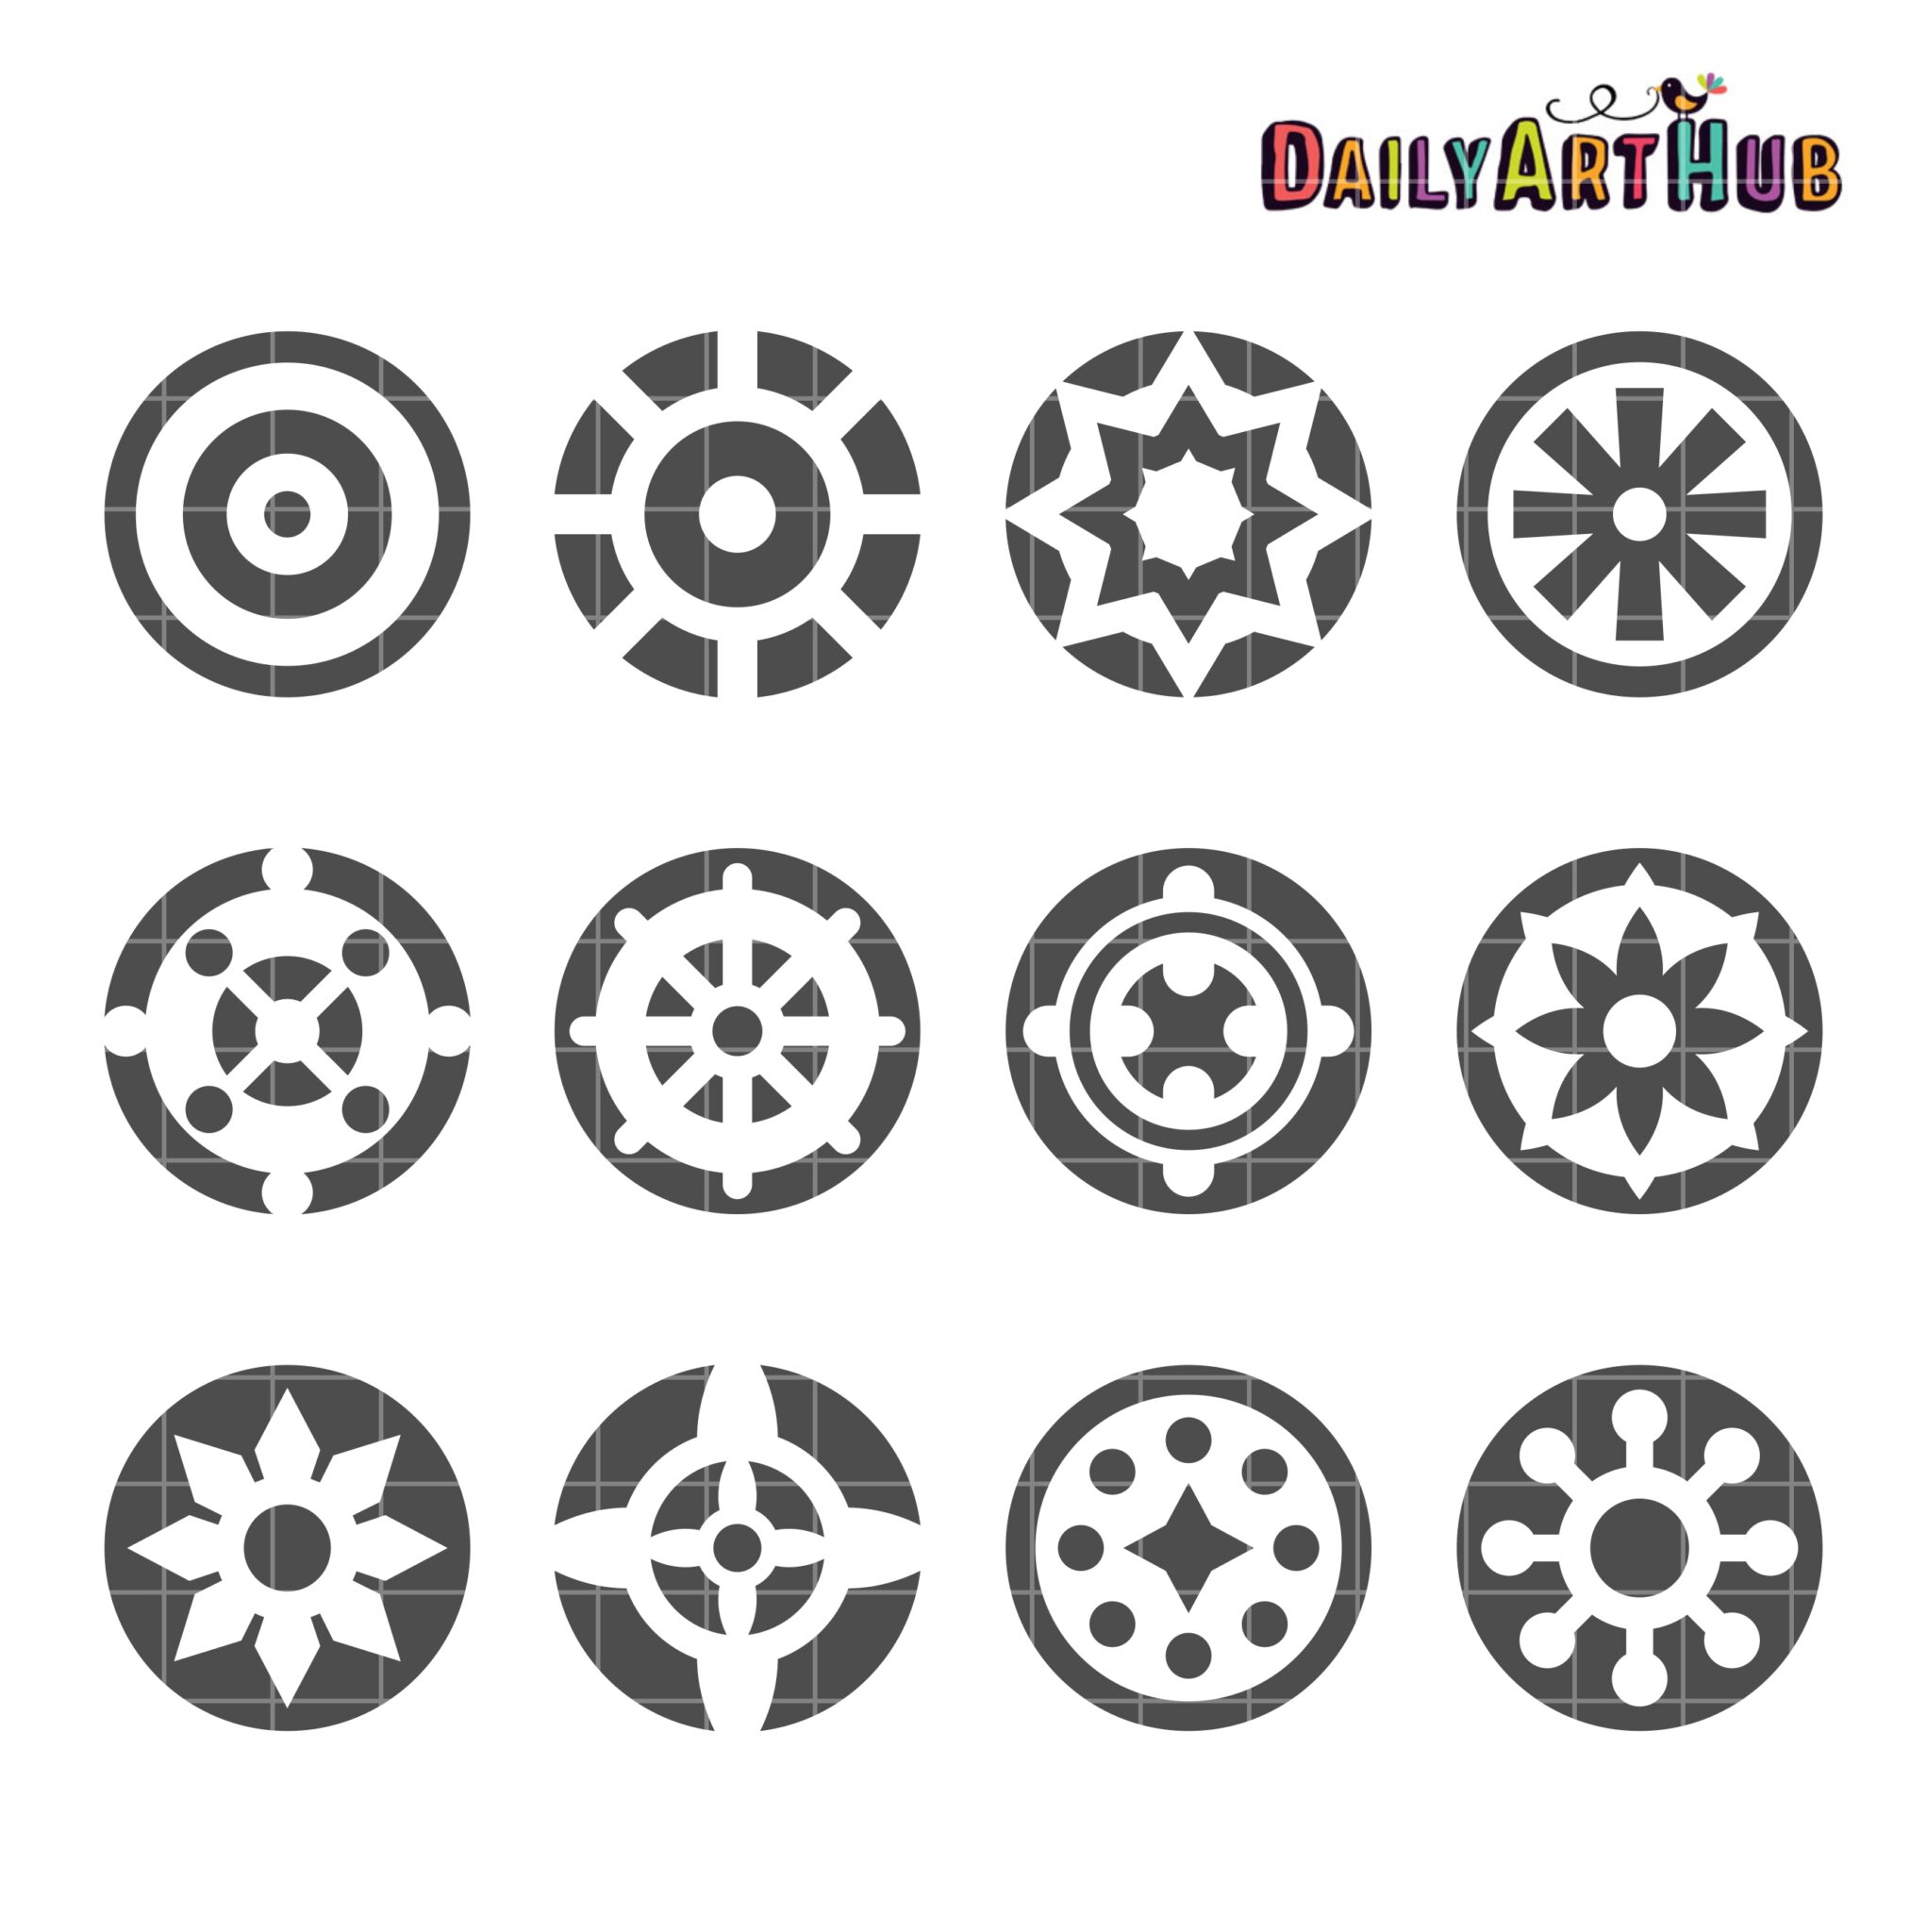 quality circle clipart shapes